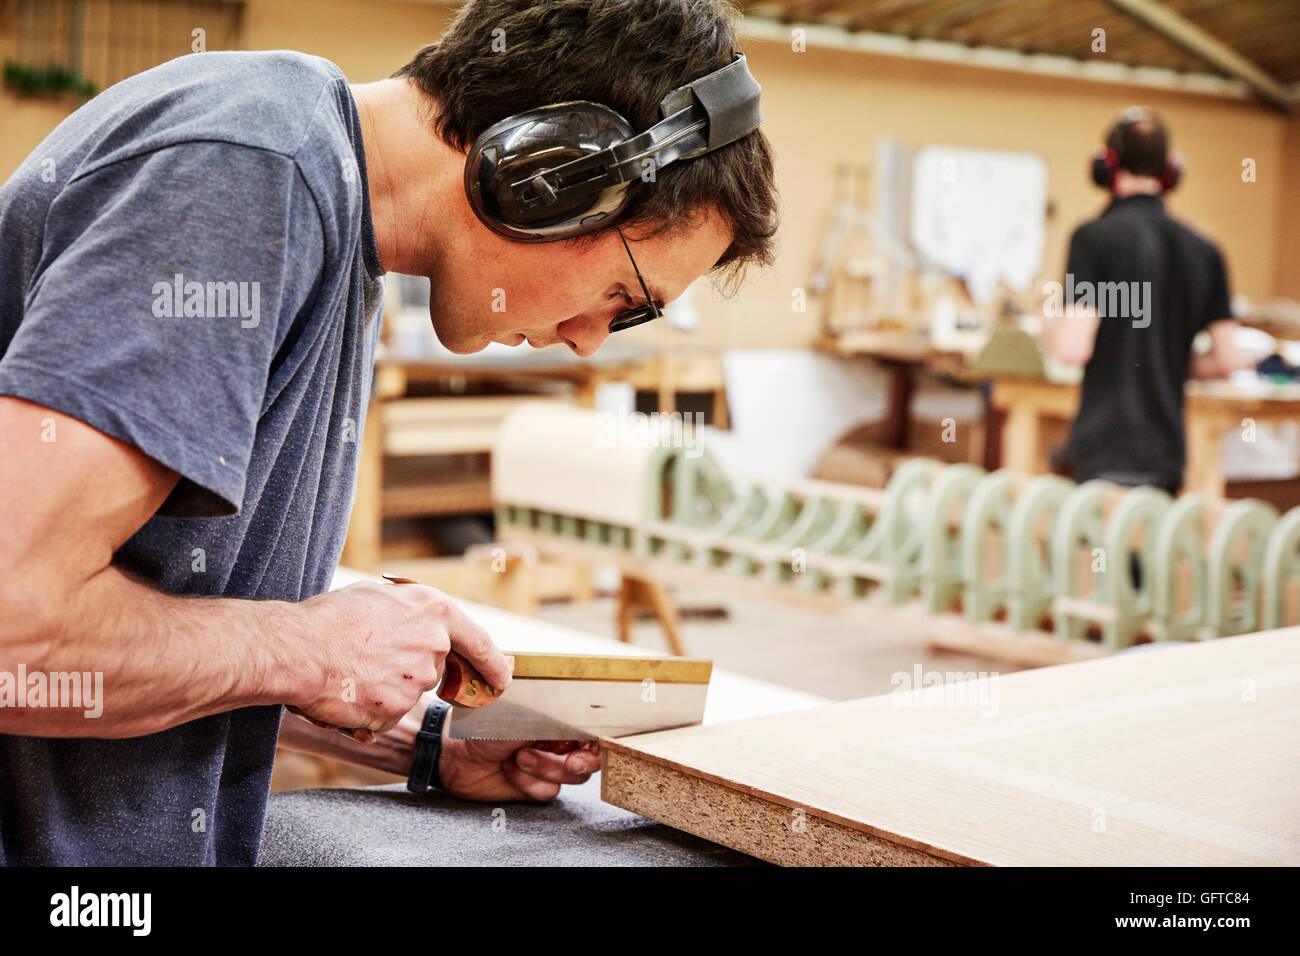 A furniture workshop ,A man using a small handsaw to trim wood Stock Photo